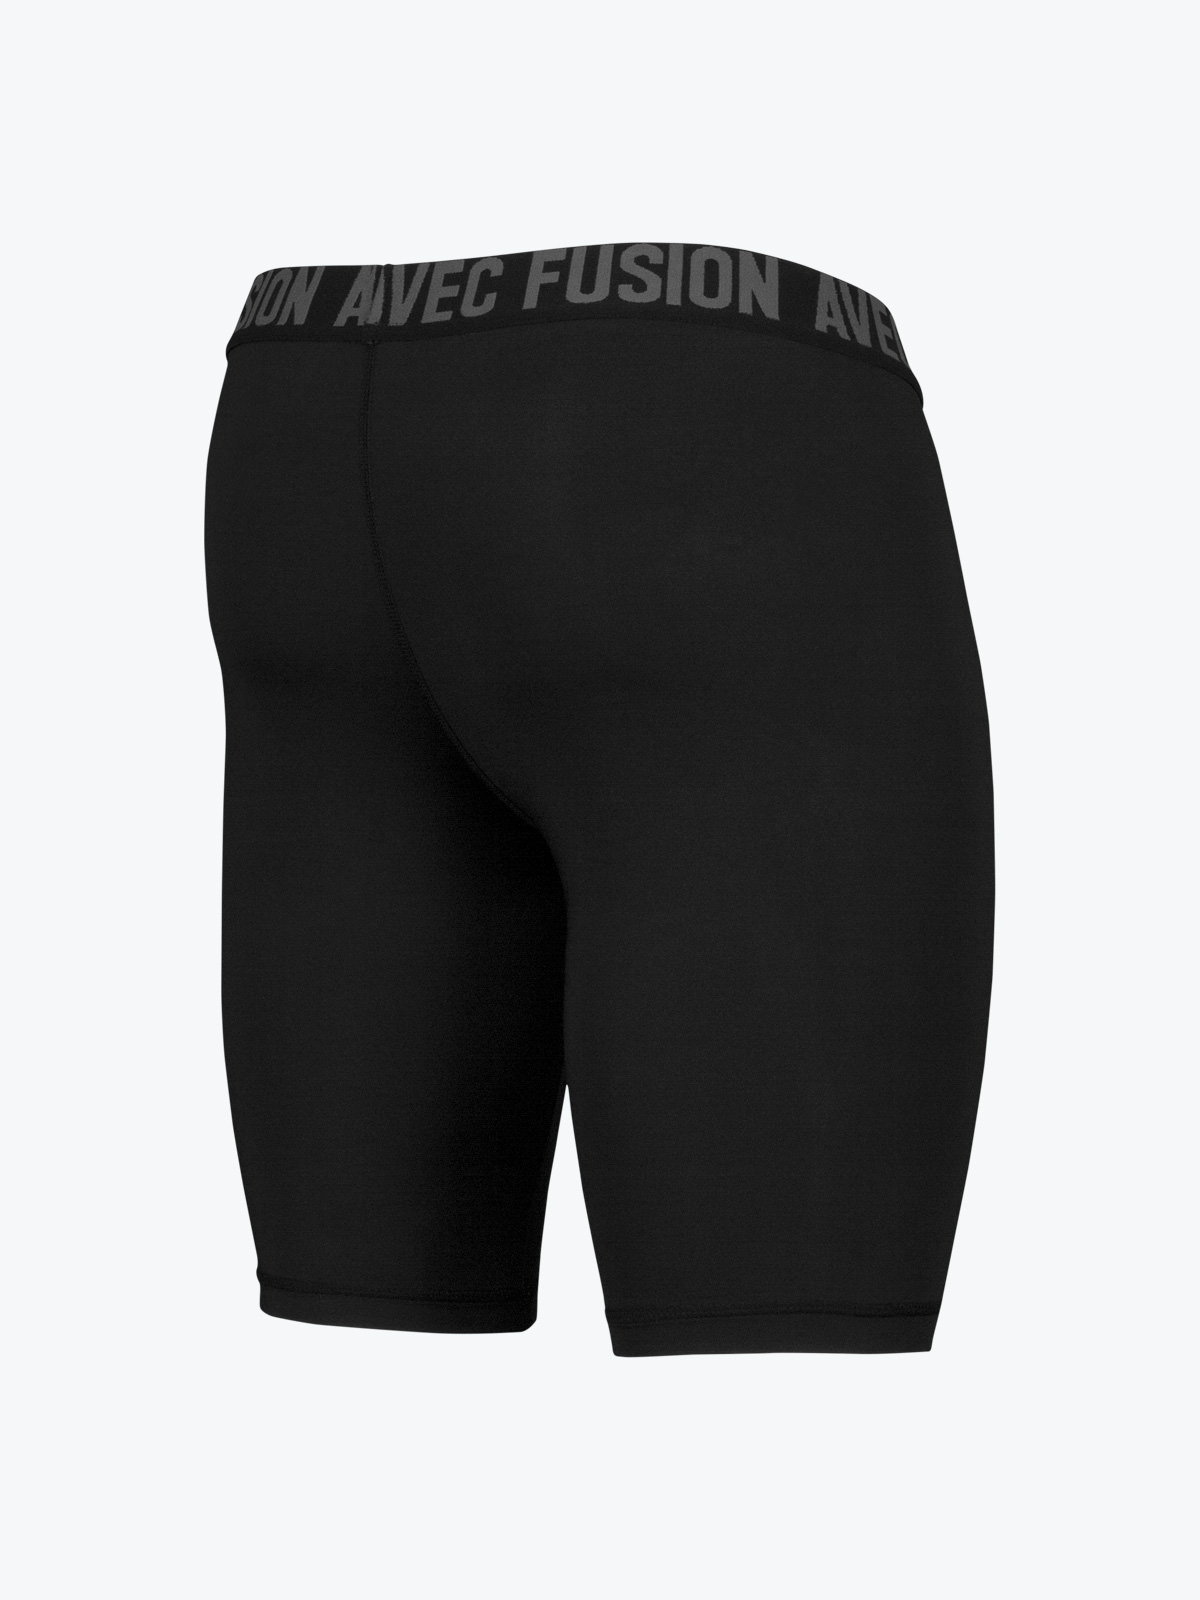 picture of fusion body fit short - black